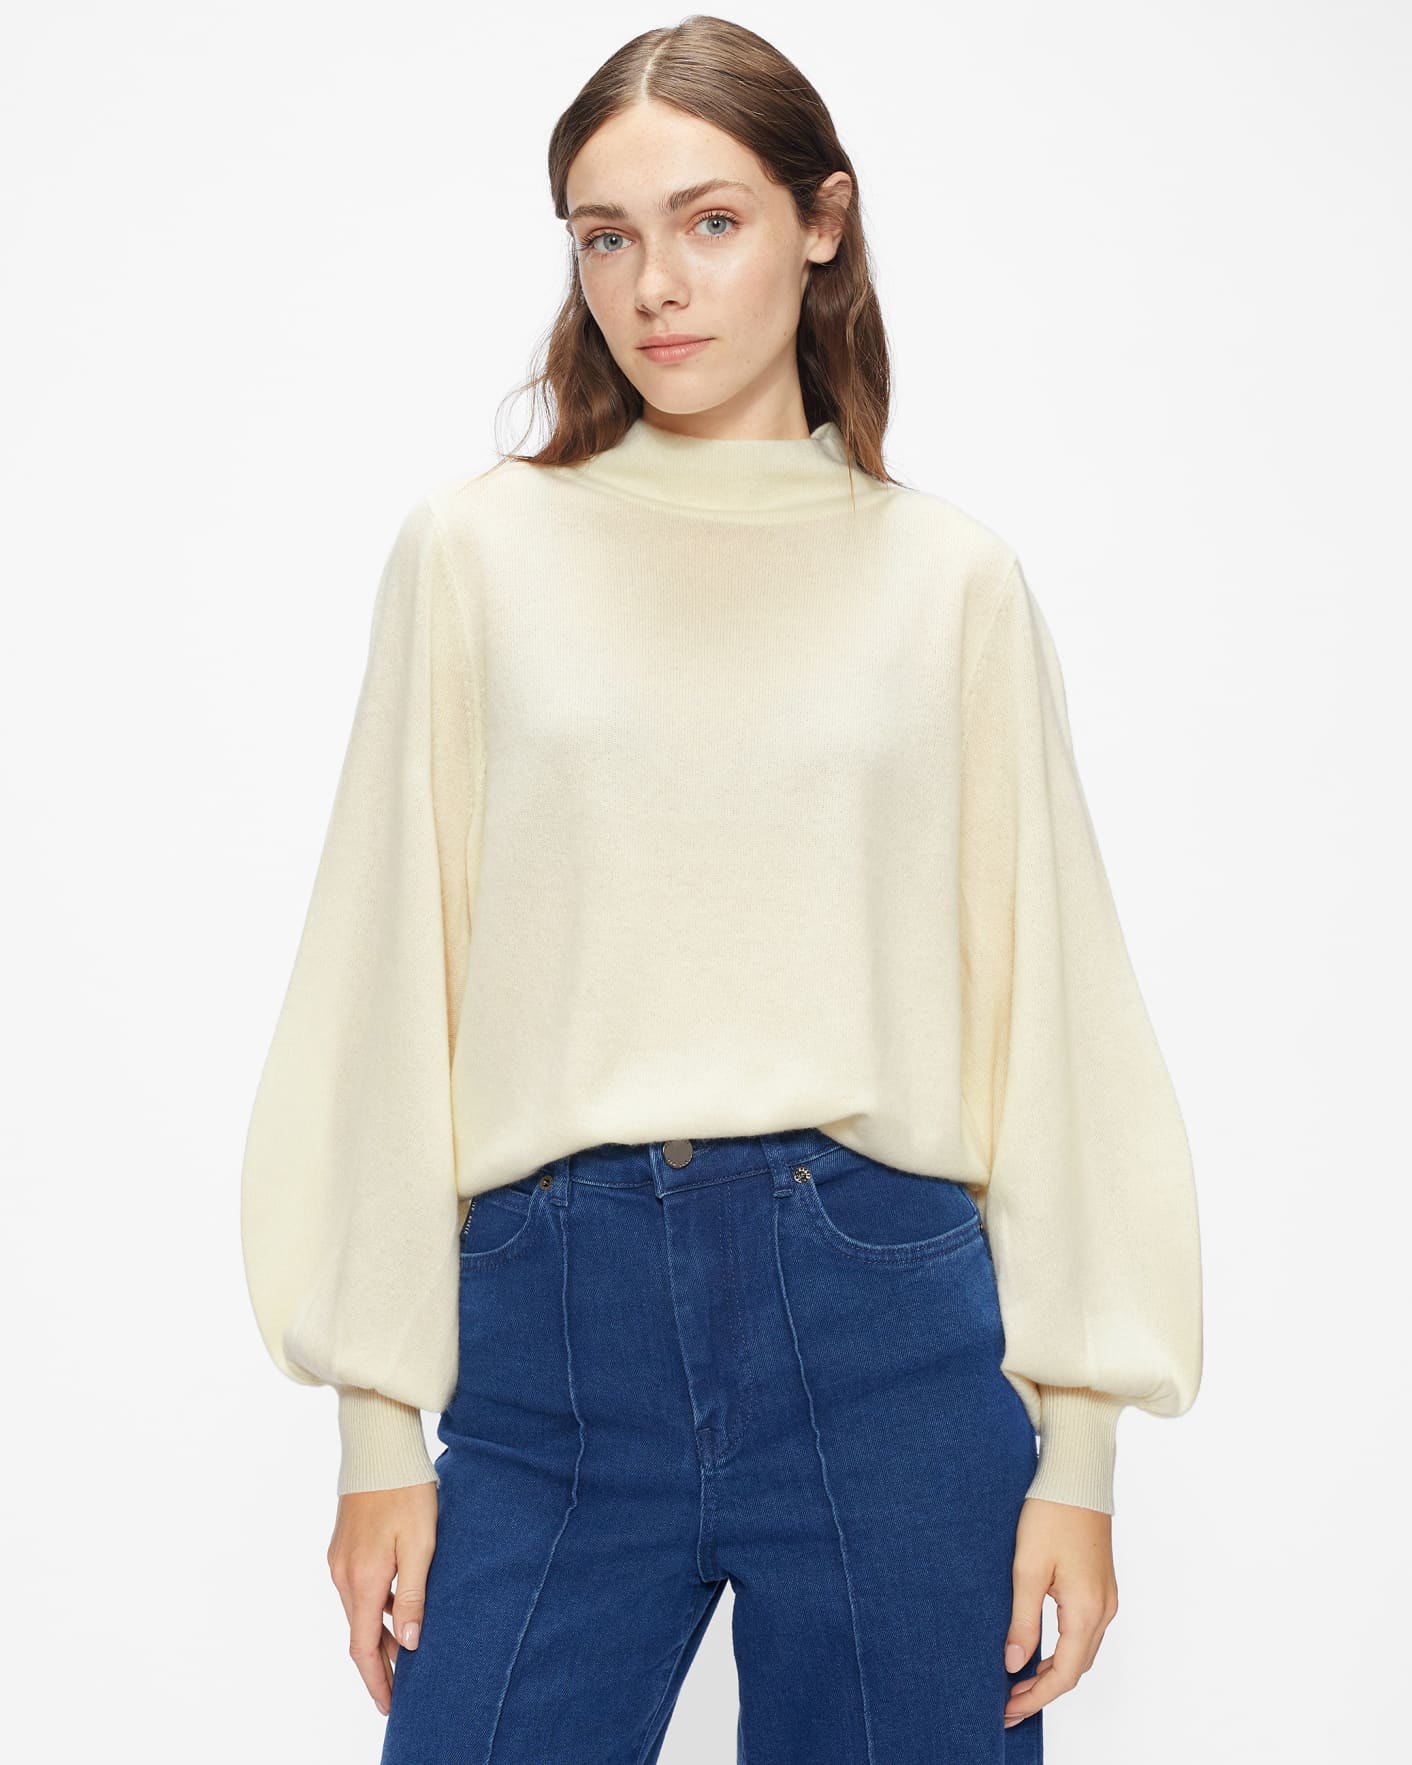 SHANO - WHITE | Knitwear | Ted Baker US